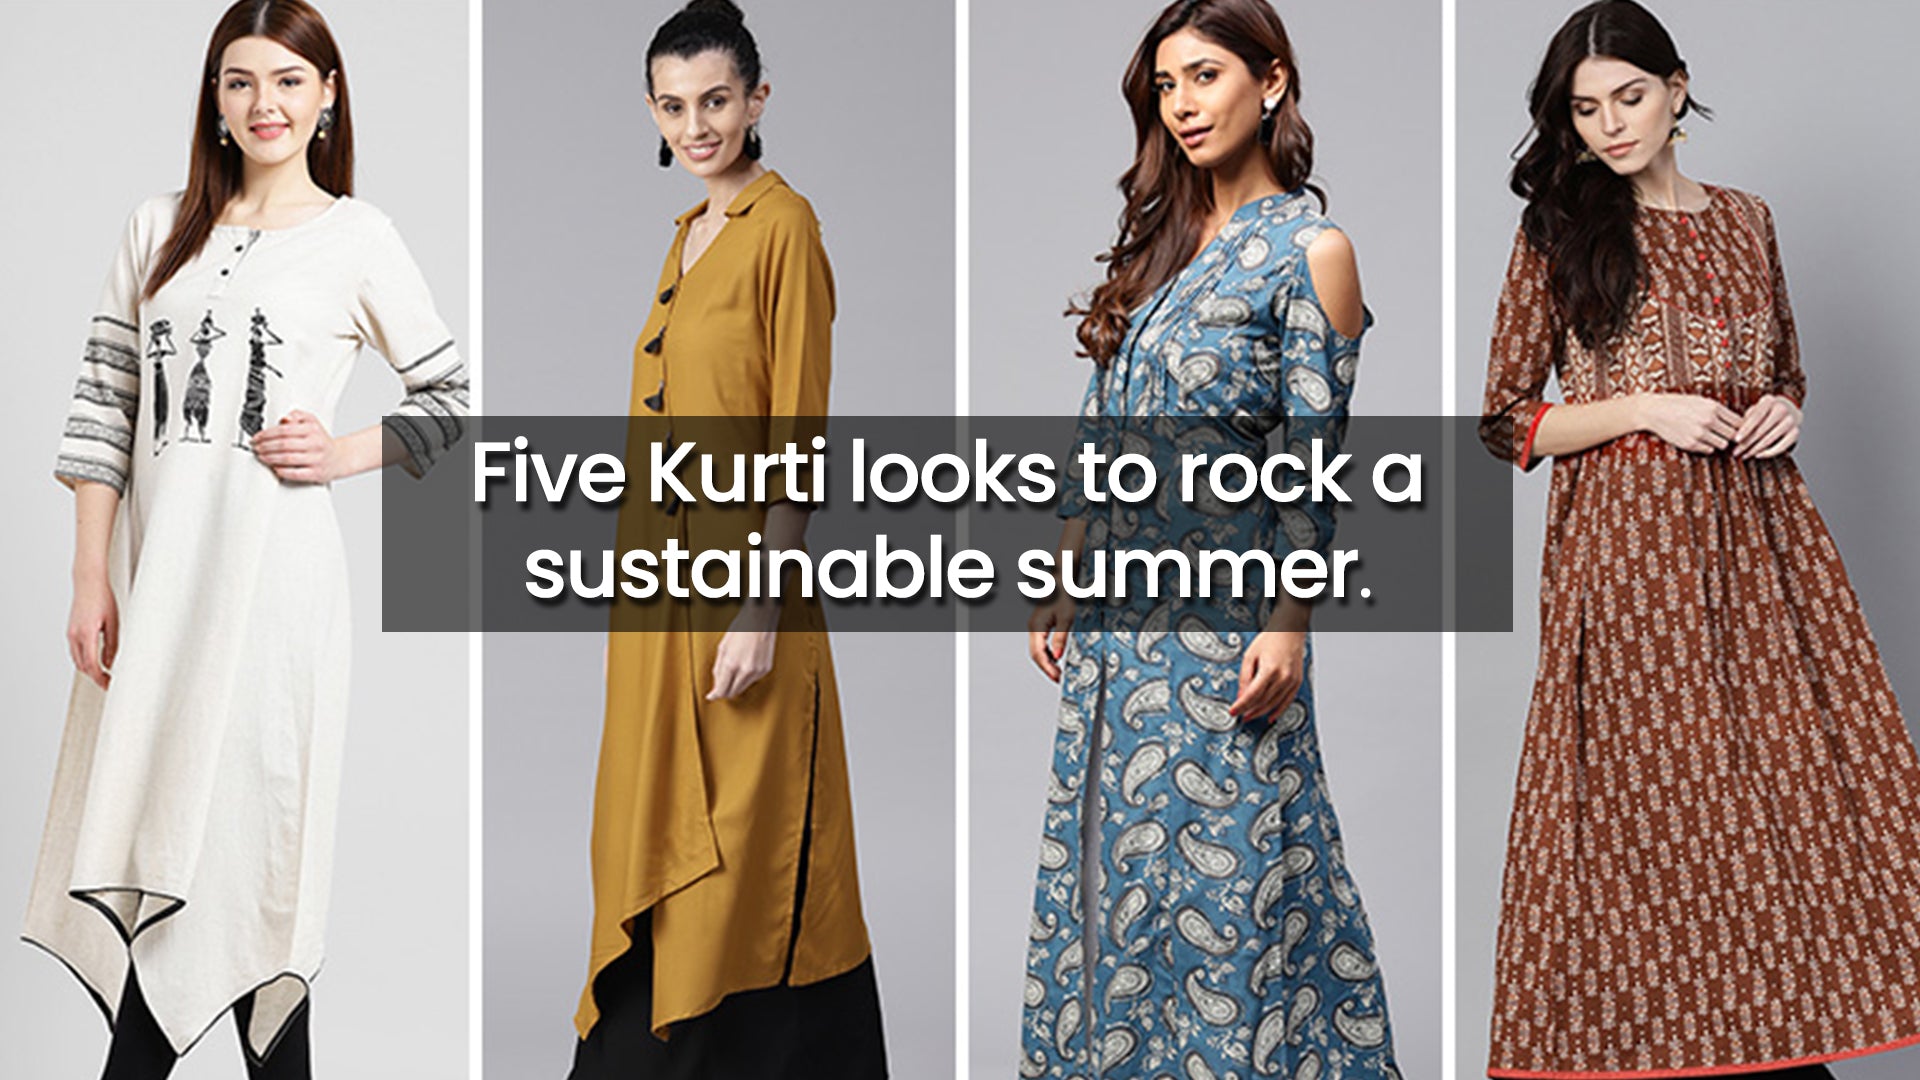 Five Kurti looks to rock a sustainable summer